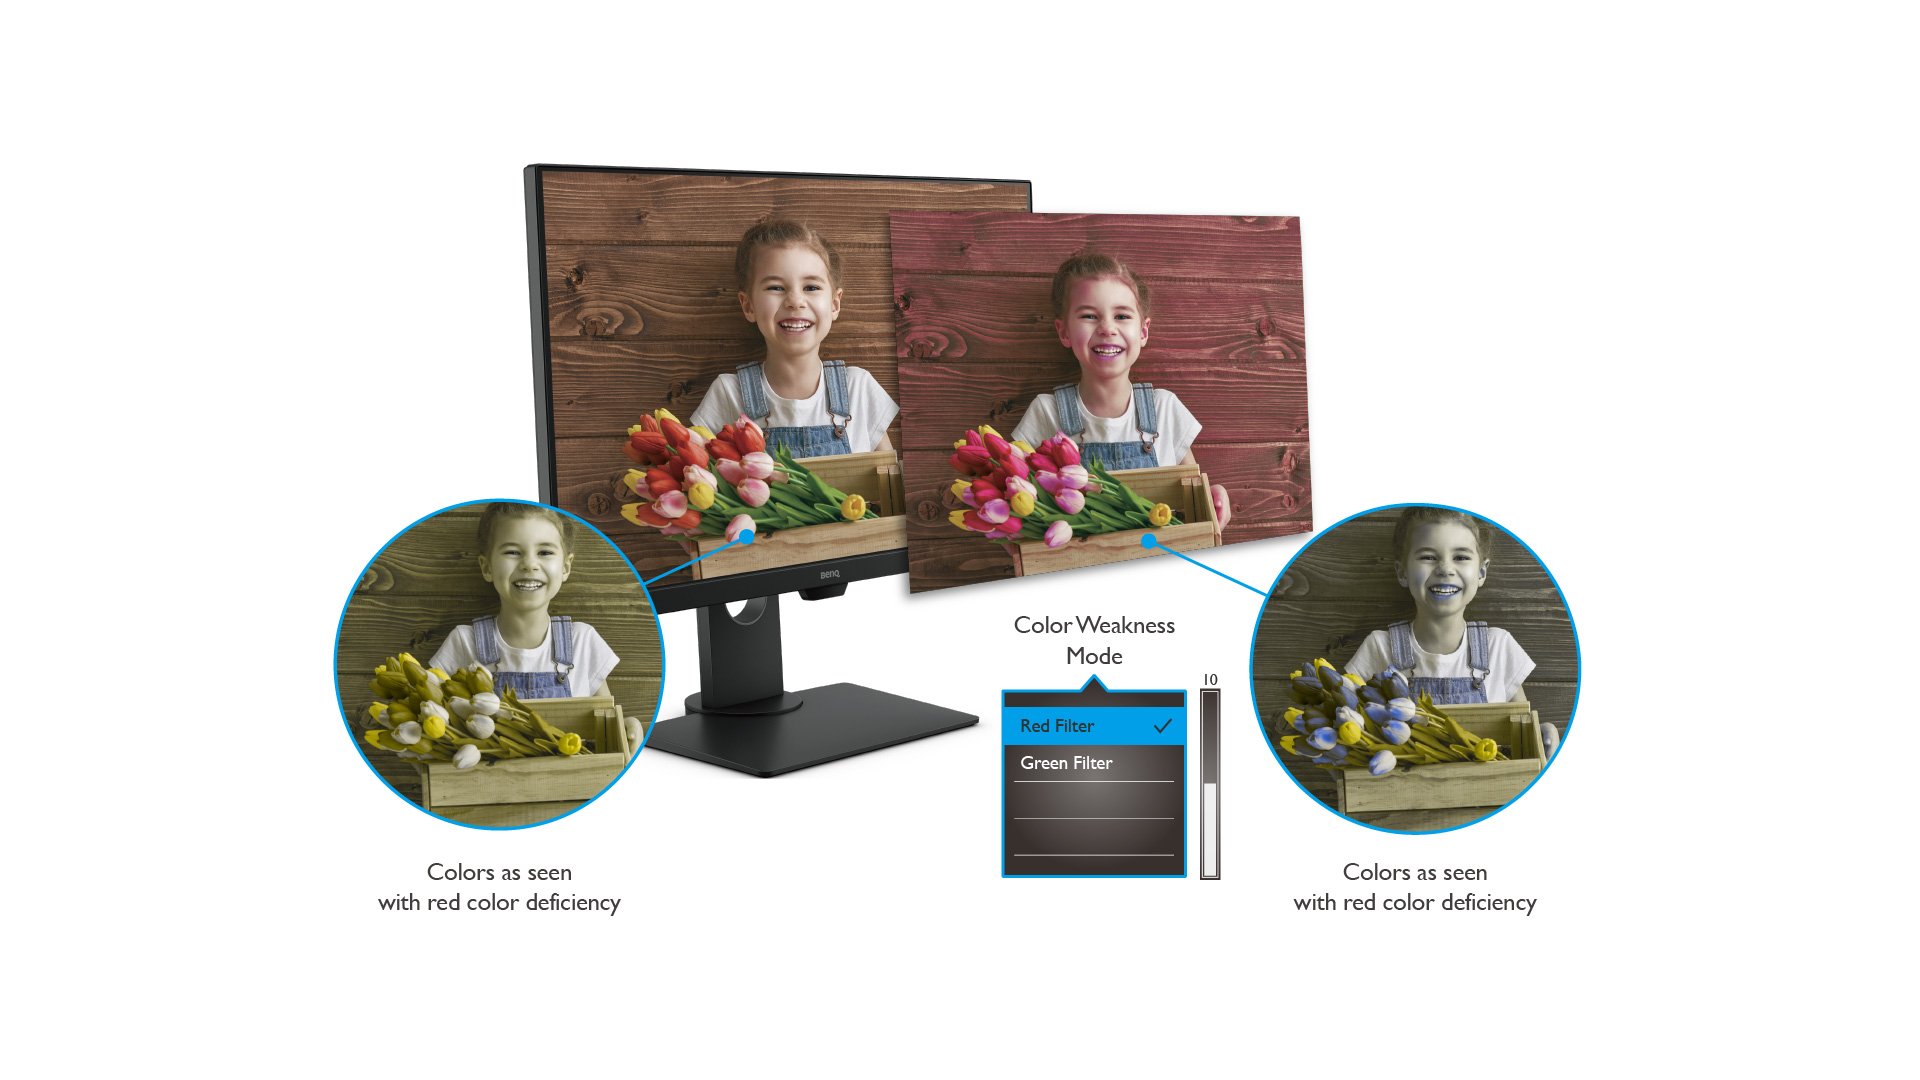 benq gw2780t has color weakness mode with red and green filters, helping individuals with common types of color vision deficiency distinguish colors more easily